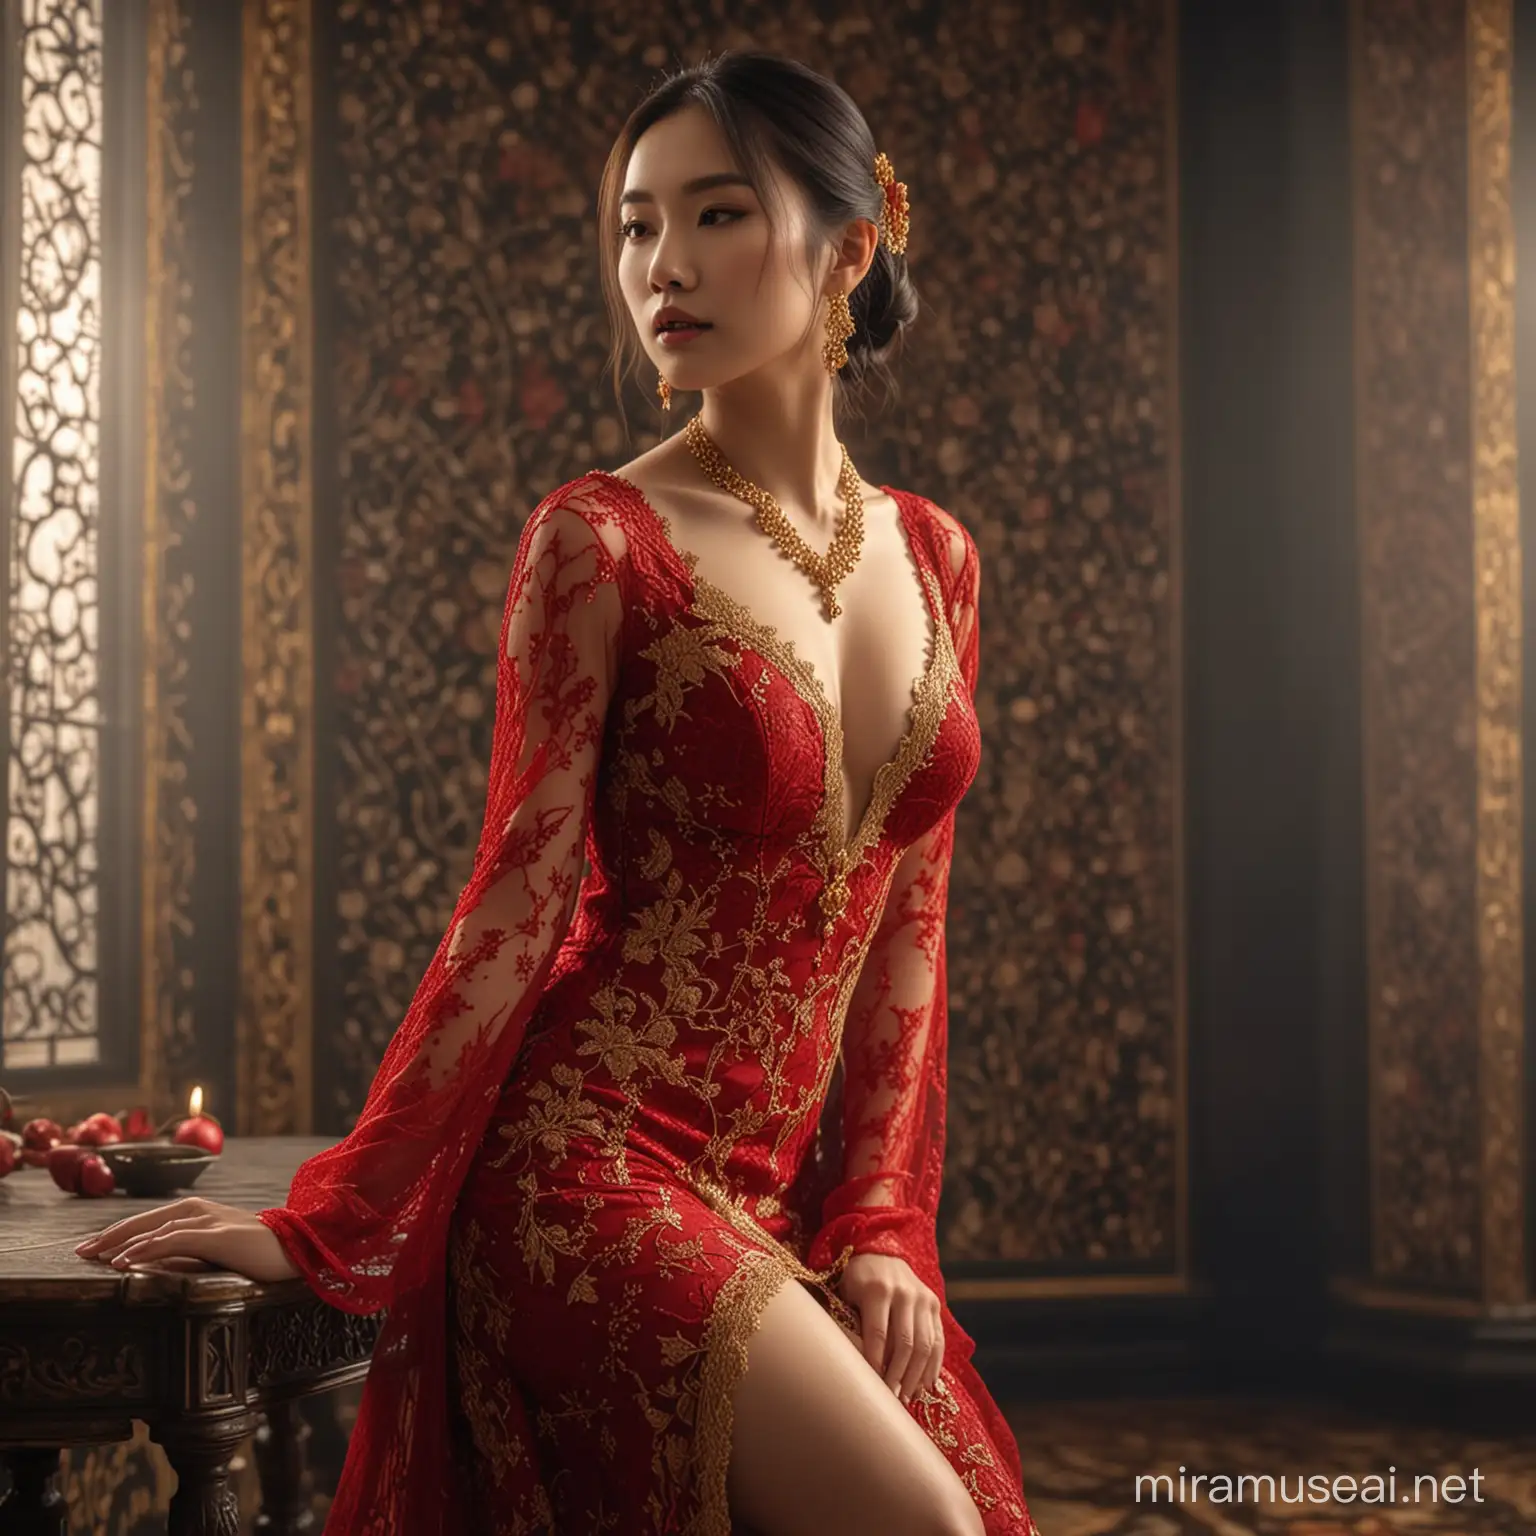 Elegant Asian Woman in Red and Gold Lace Dress with Gothic Undertones